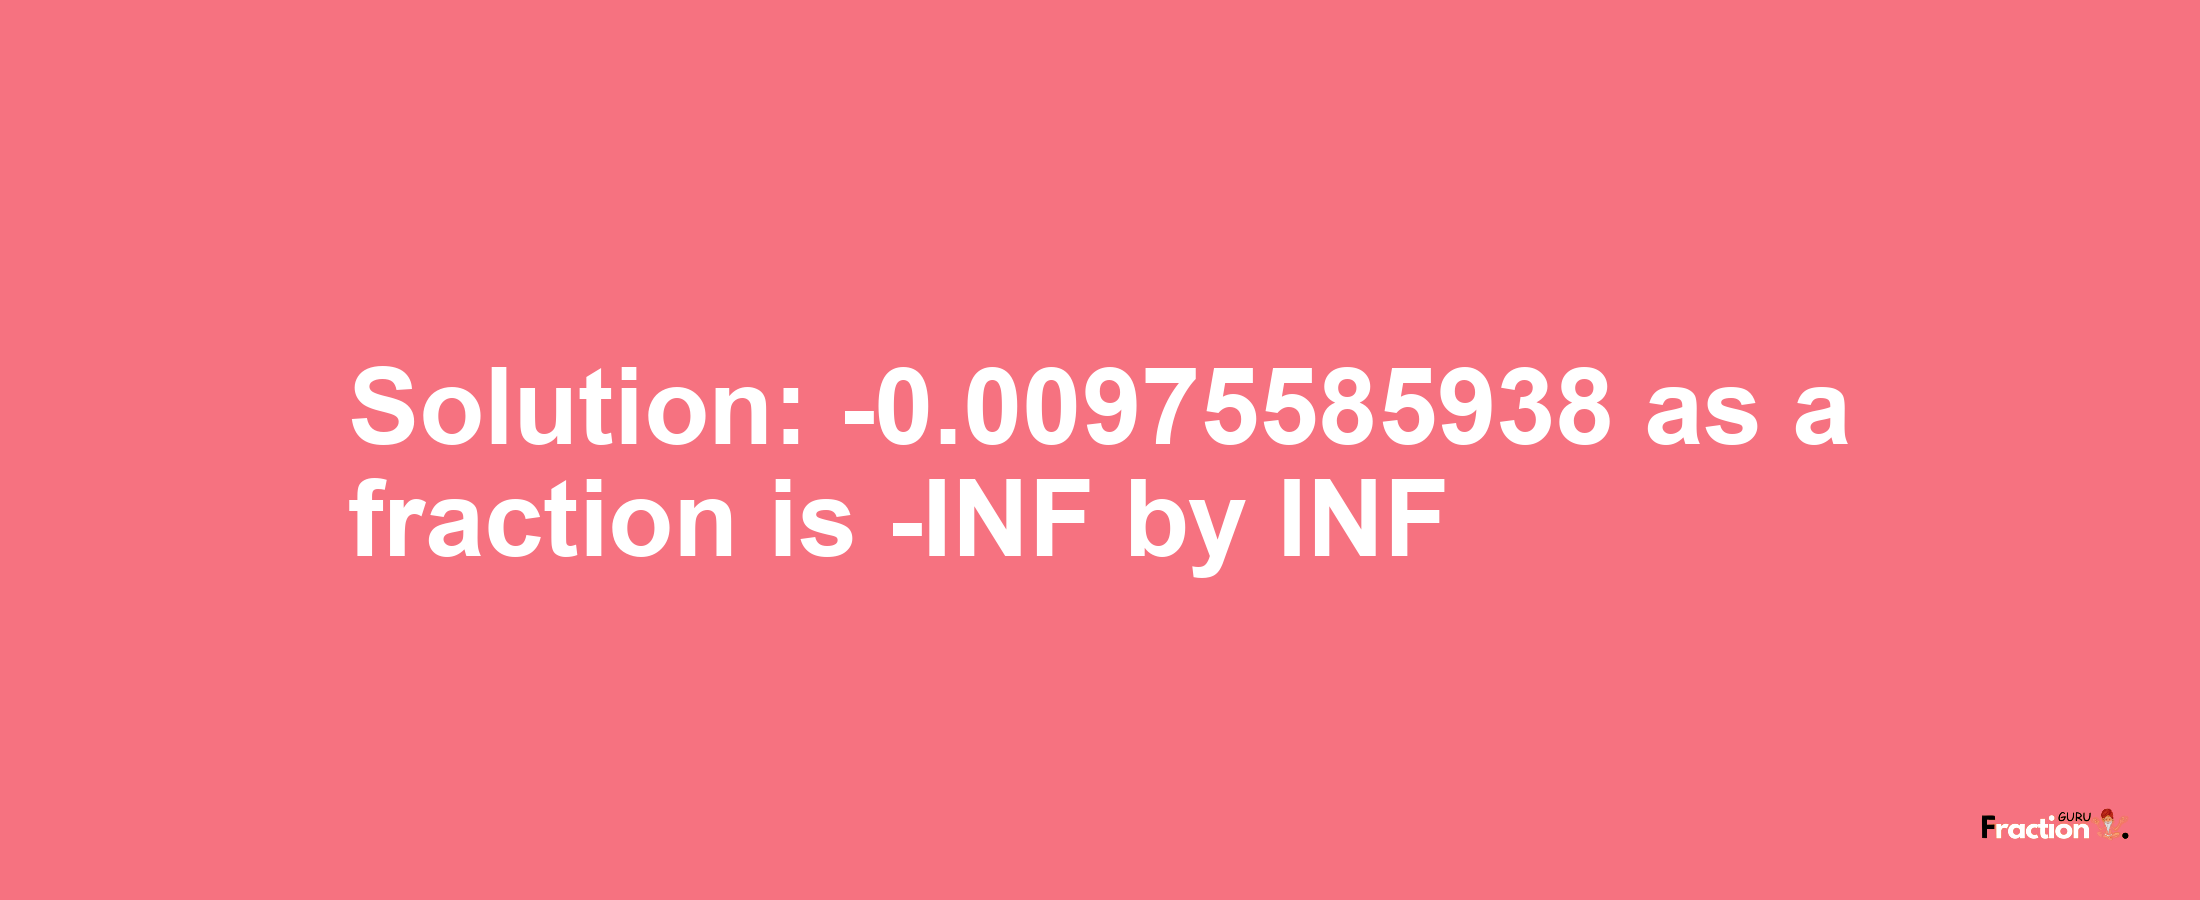 Solution:-0.00975585938 as a fraction is -INF/INF